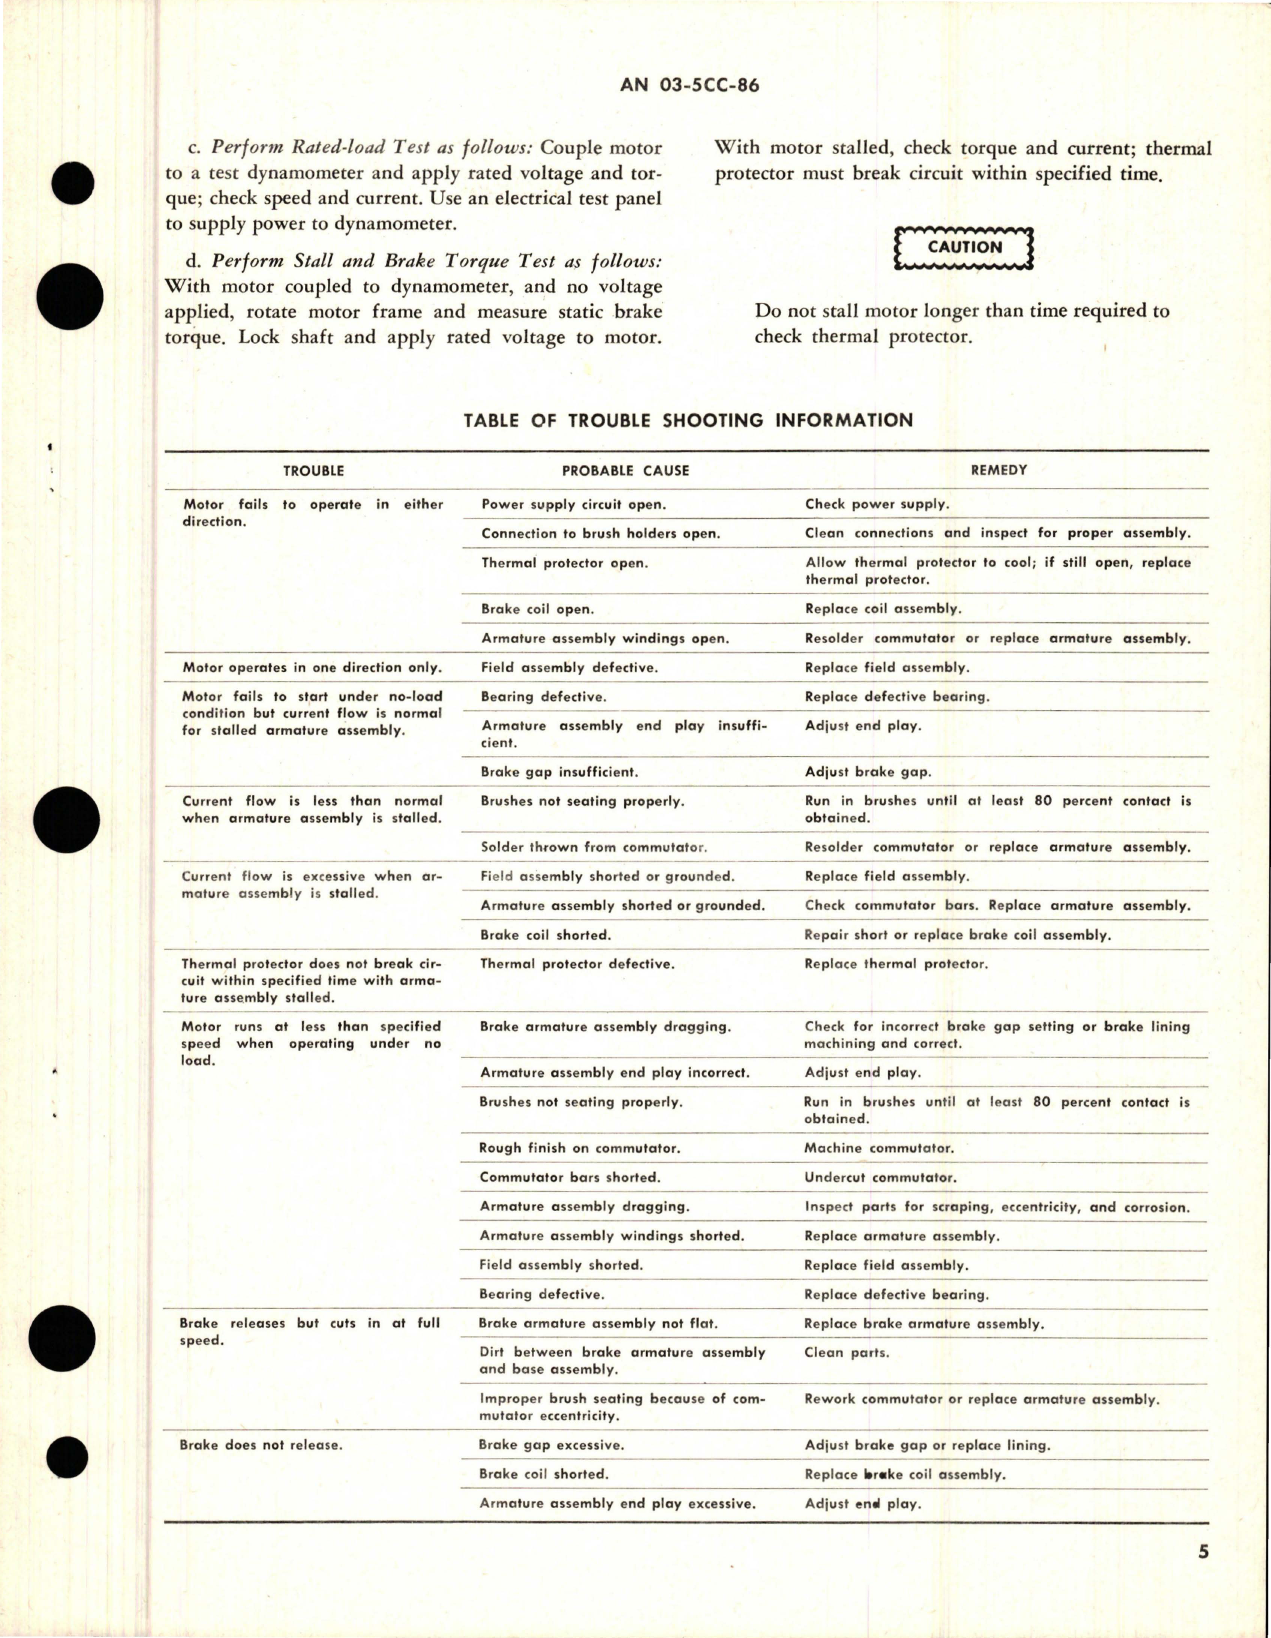 Sample page 5 from AirCorps Library document: Overhaul Instructions with Parts Breakdown for Direct Current Motor - Part 32370-2 